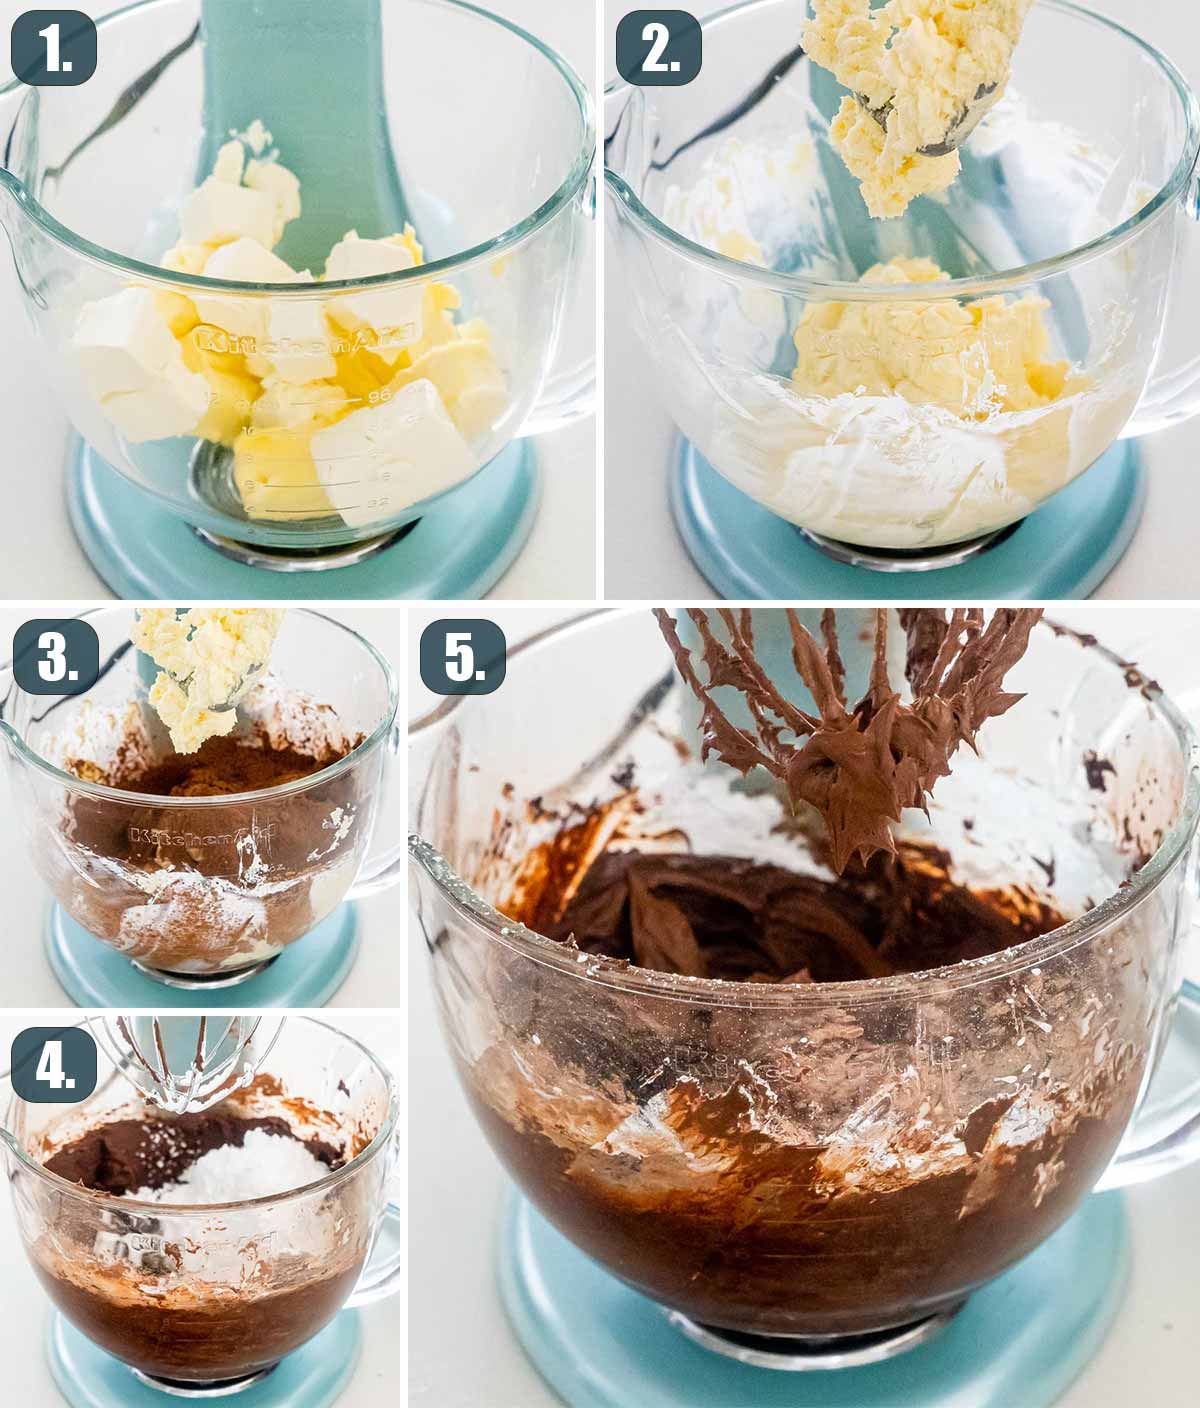 detailed process shots showing how to make chocolate frosting.